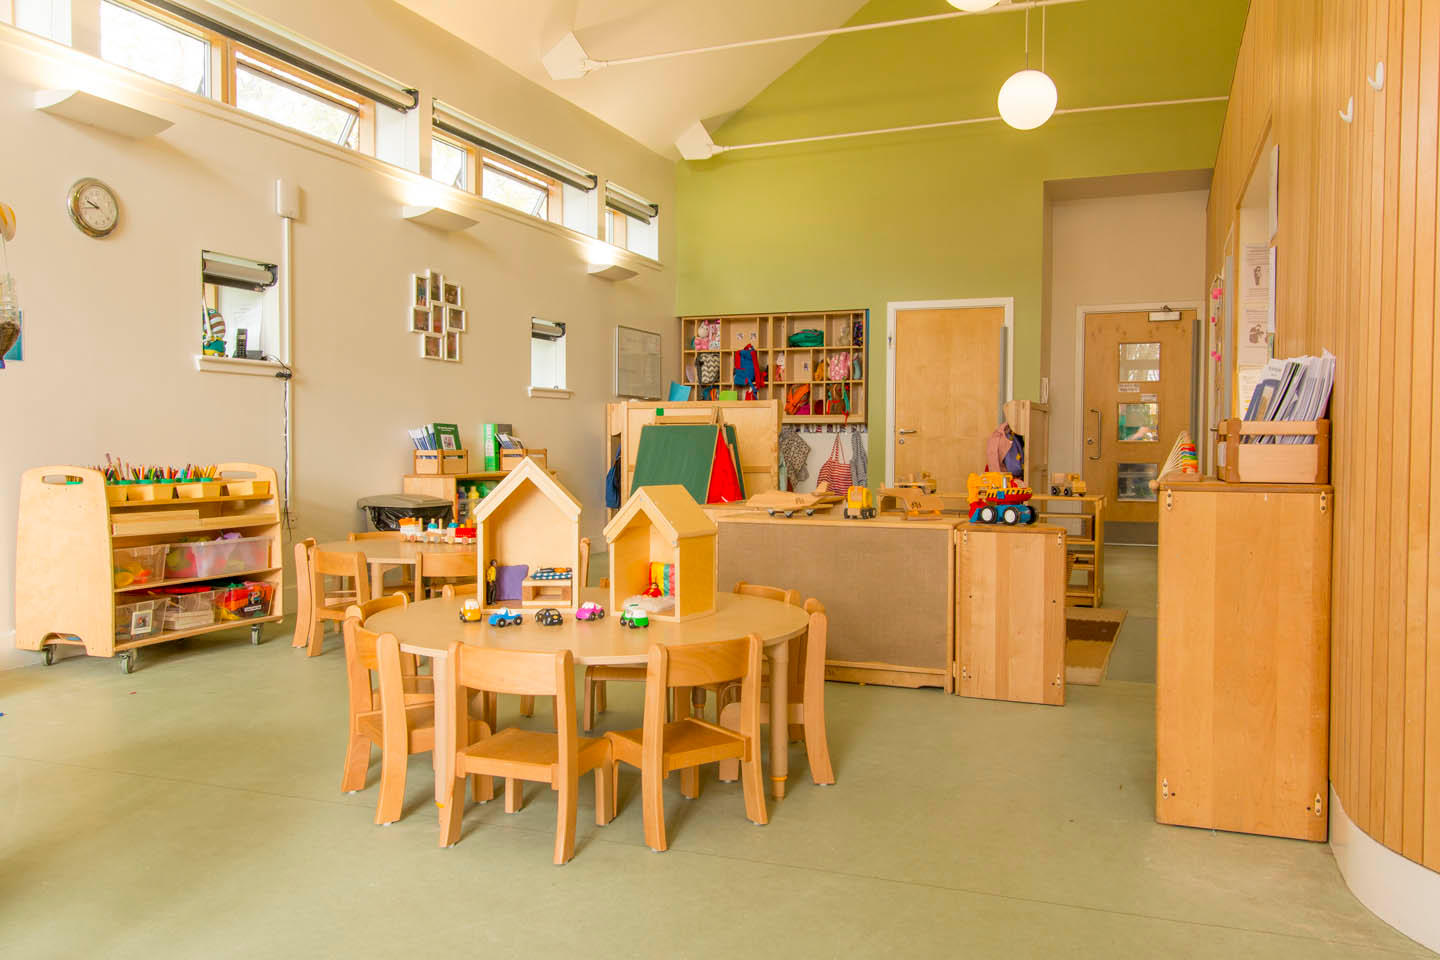 Images Bright Horizons The Treehouse Early Care & Education Centre